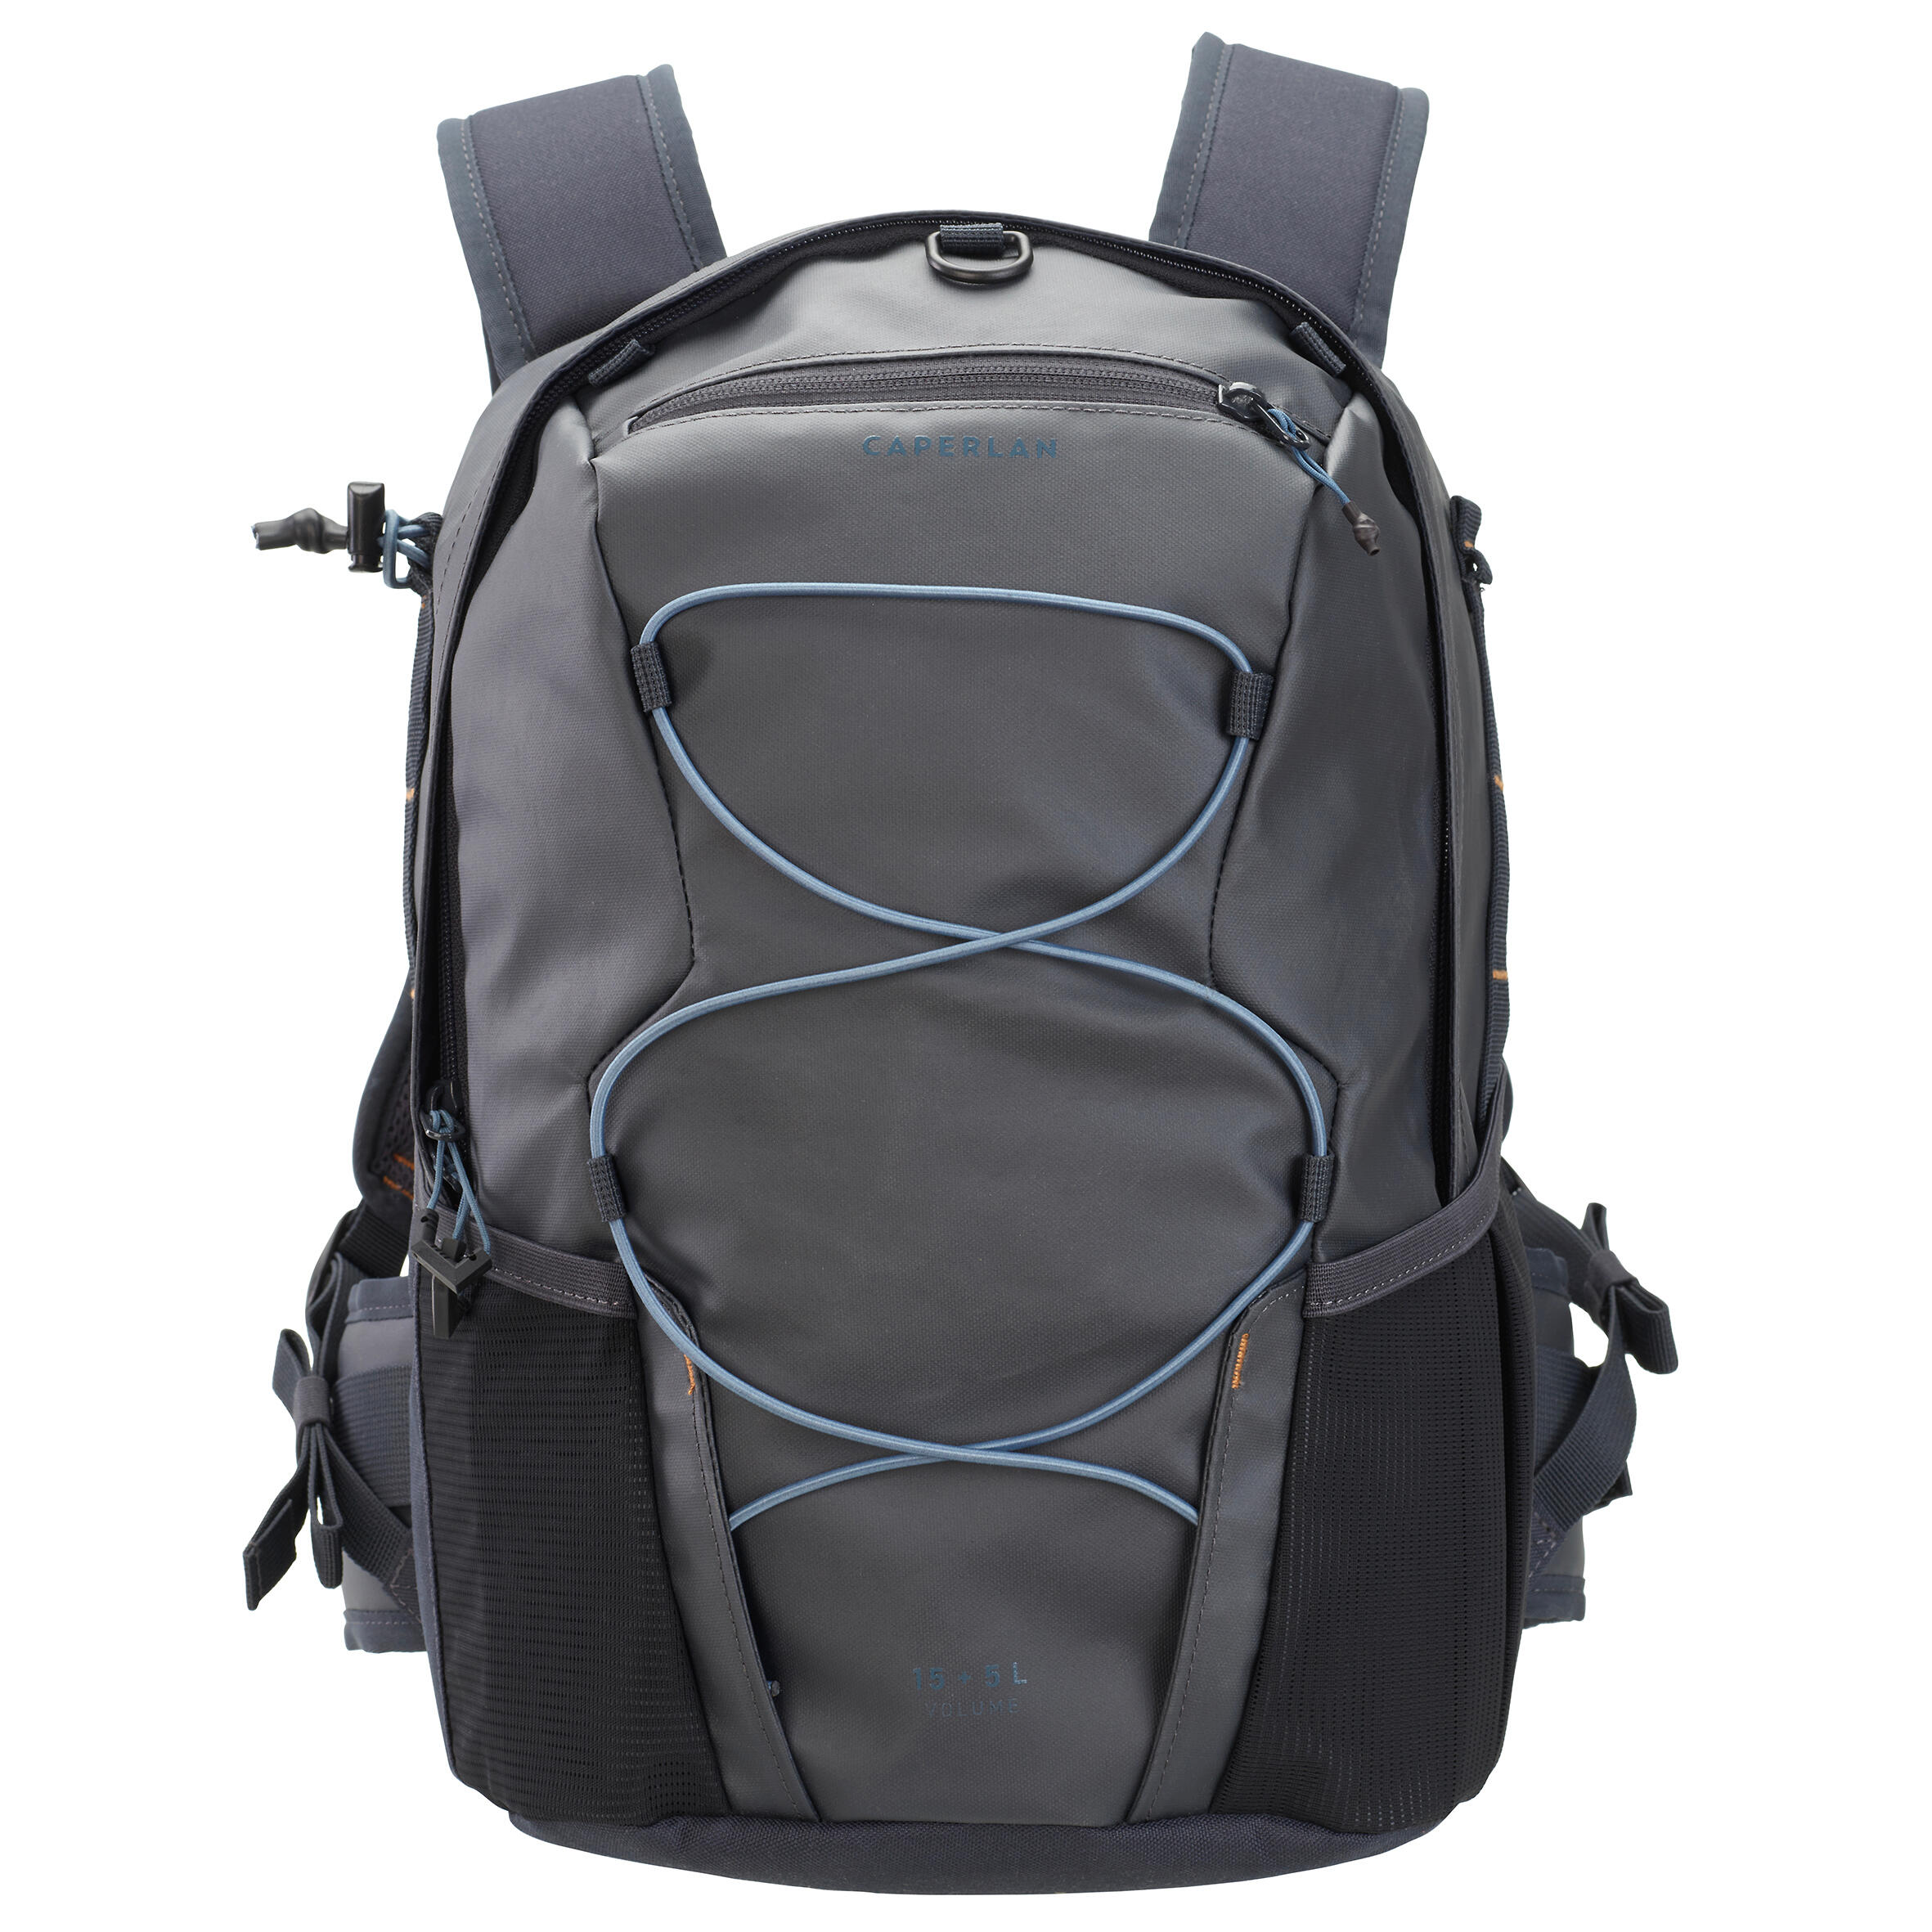 500 fishing backpack and chest pack - Caperlan - Decathlon